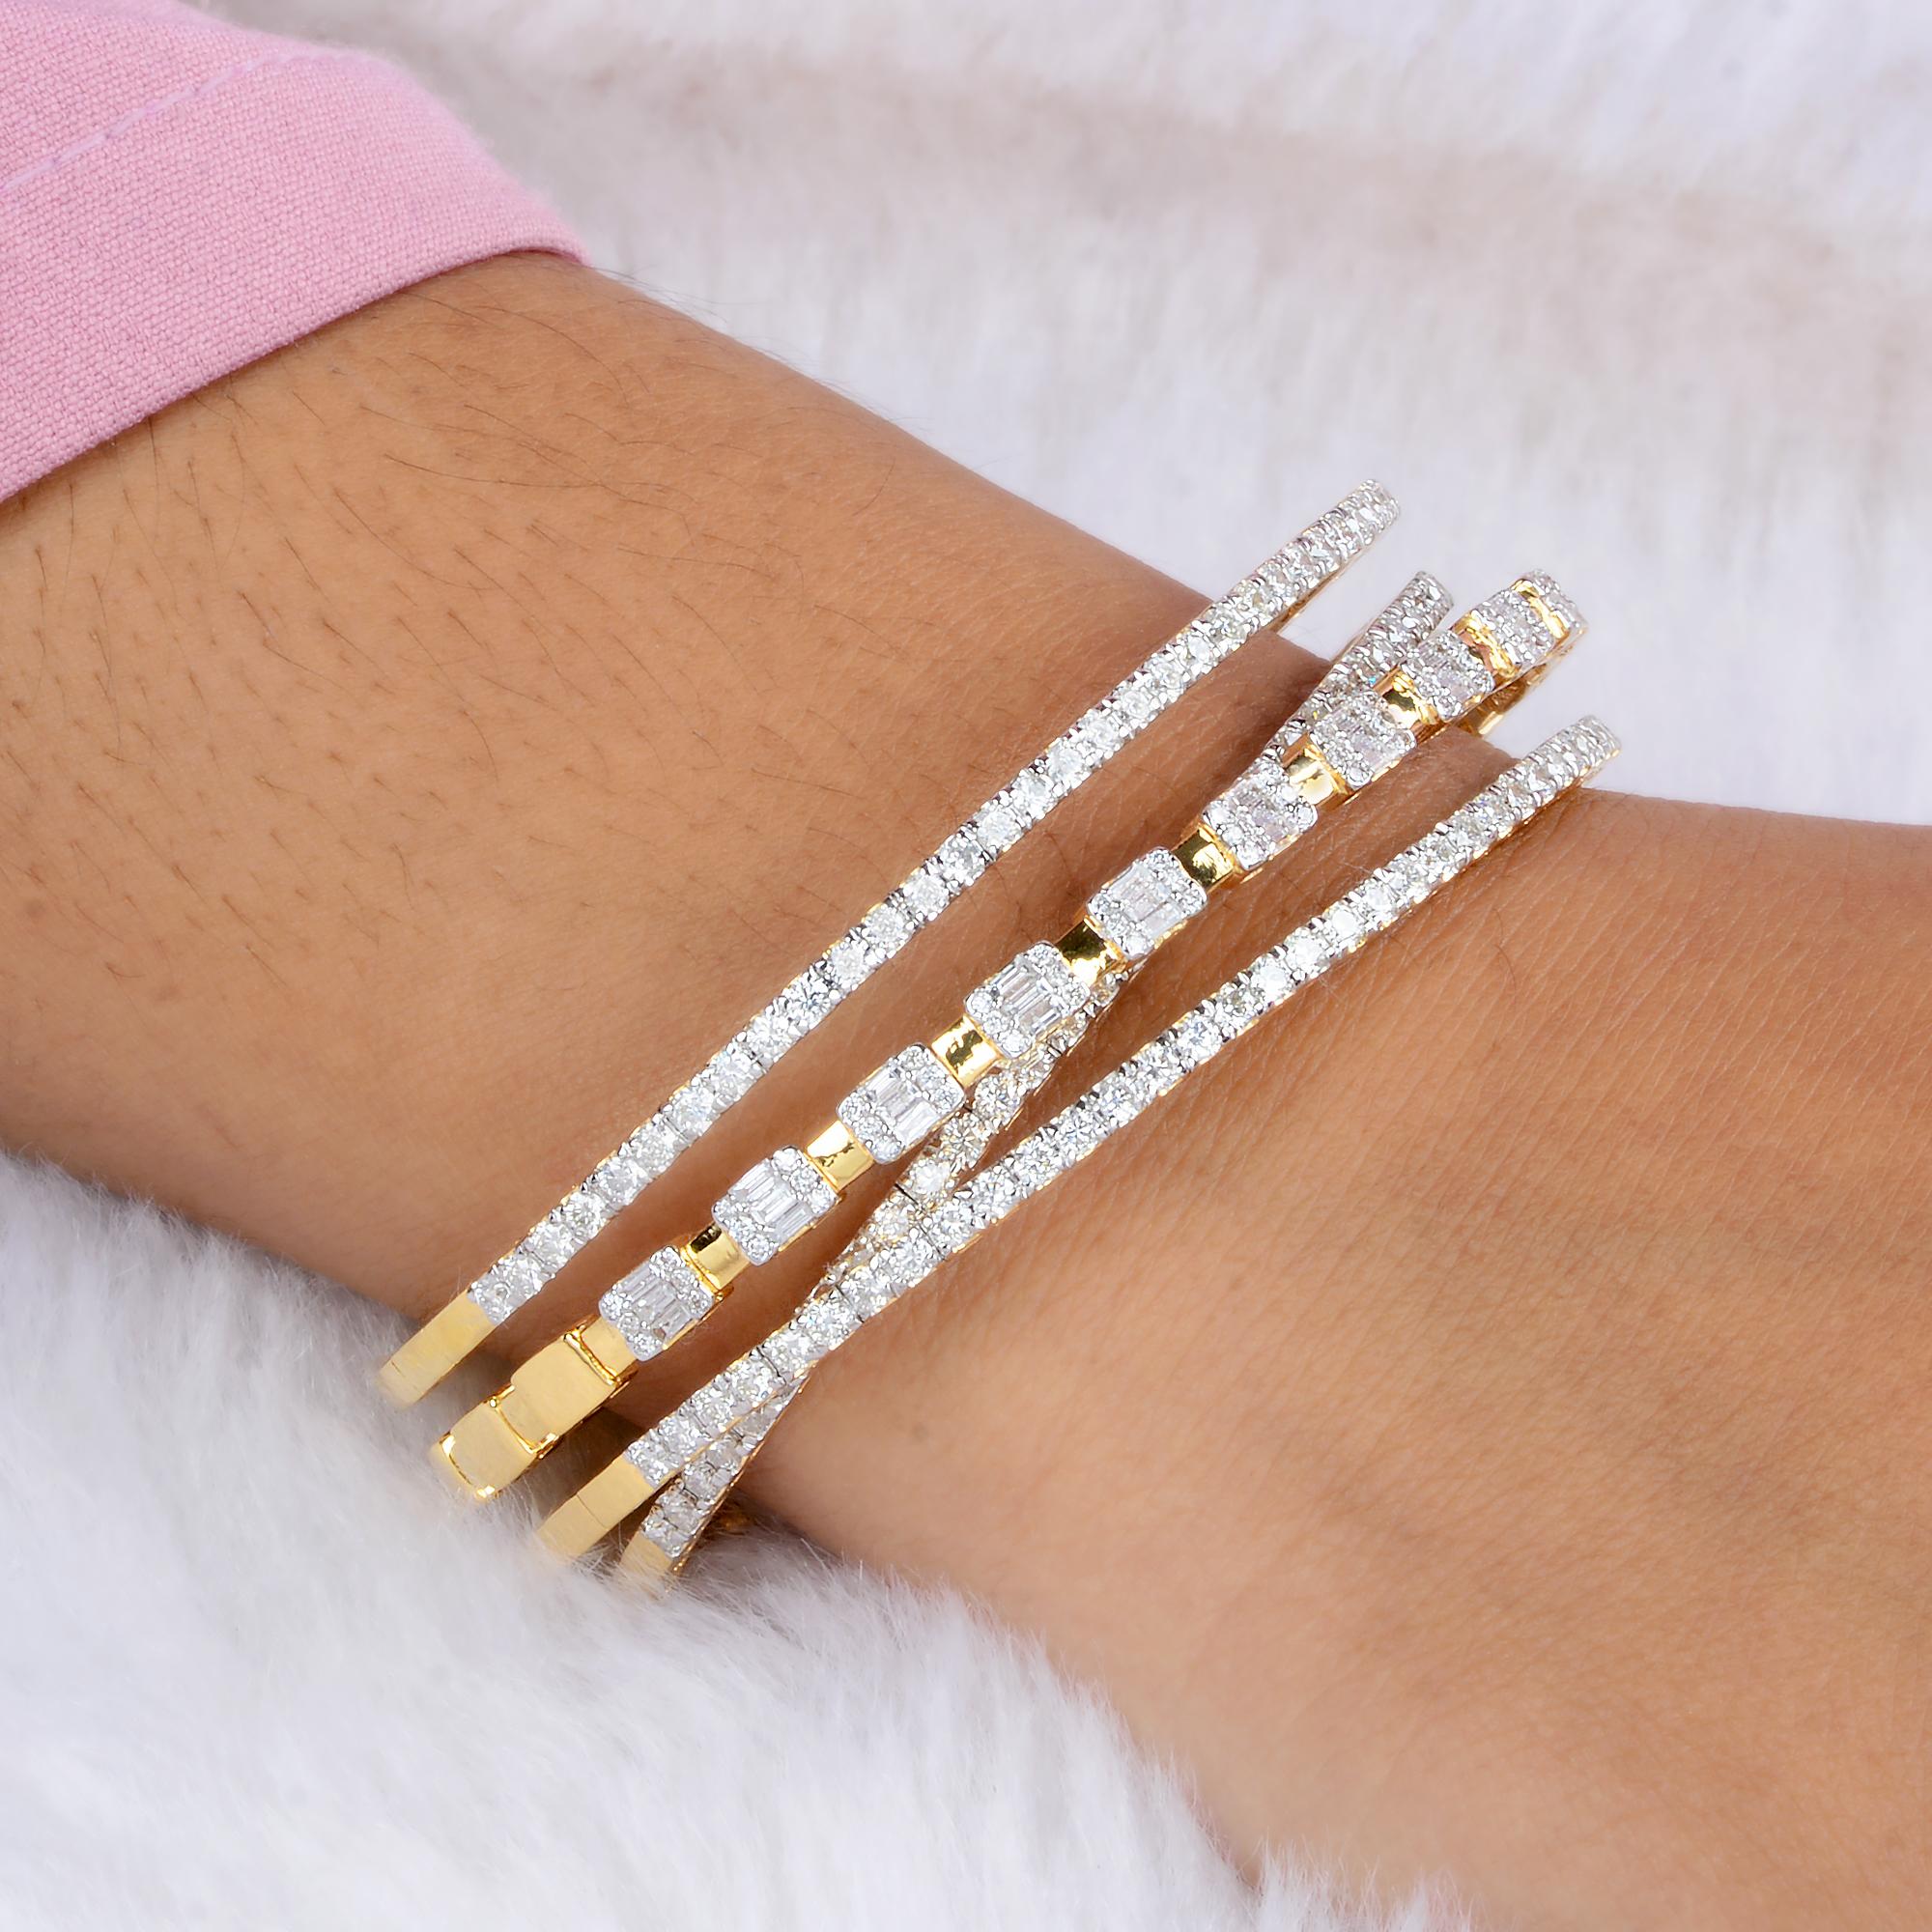 This baguette diamond multi-layer cuff bangle bracelet is a versatile piece that can be worn for both formal and casual occasions. Its sophisticated design adds a touch of glamour to any outfit, whether it's a glamorous evening gown or a chic